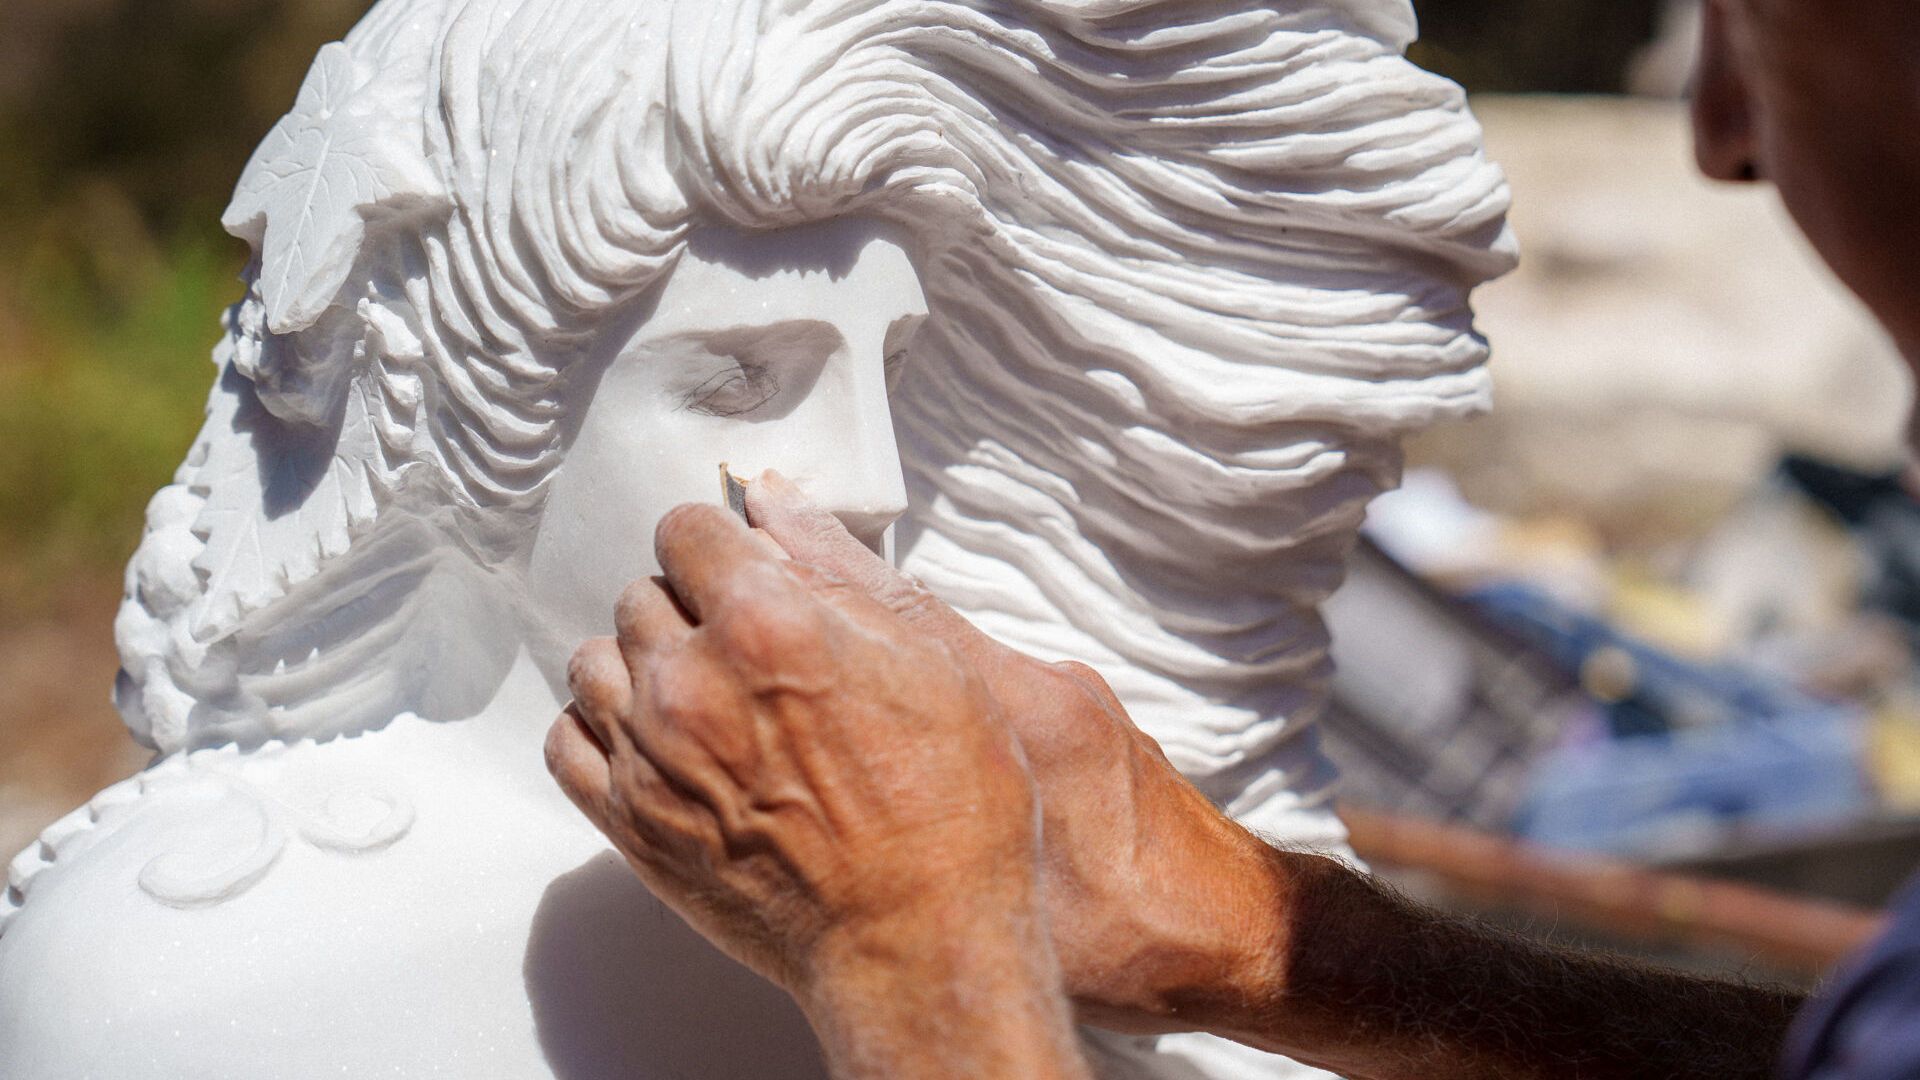 Thassos’ marble sculpting tradition dates to the 7th century BC 